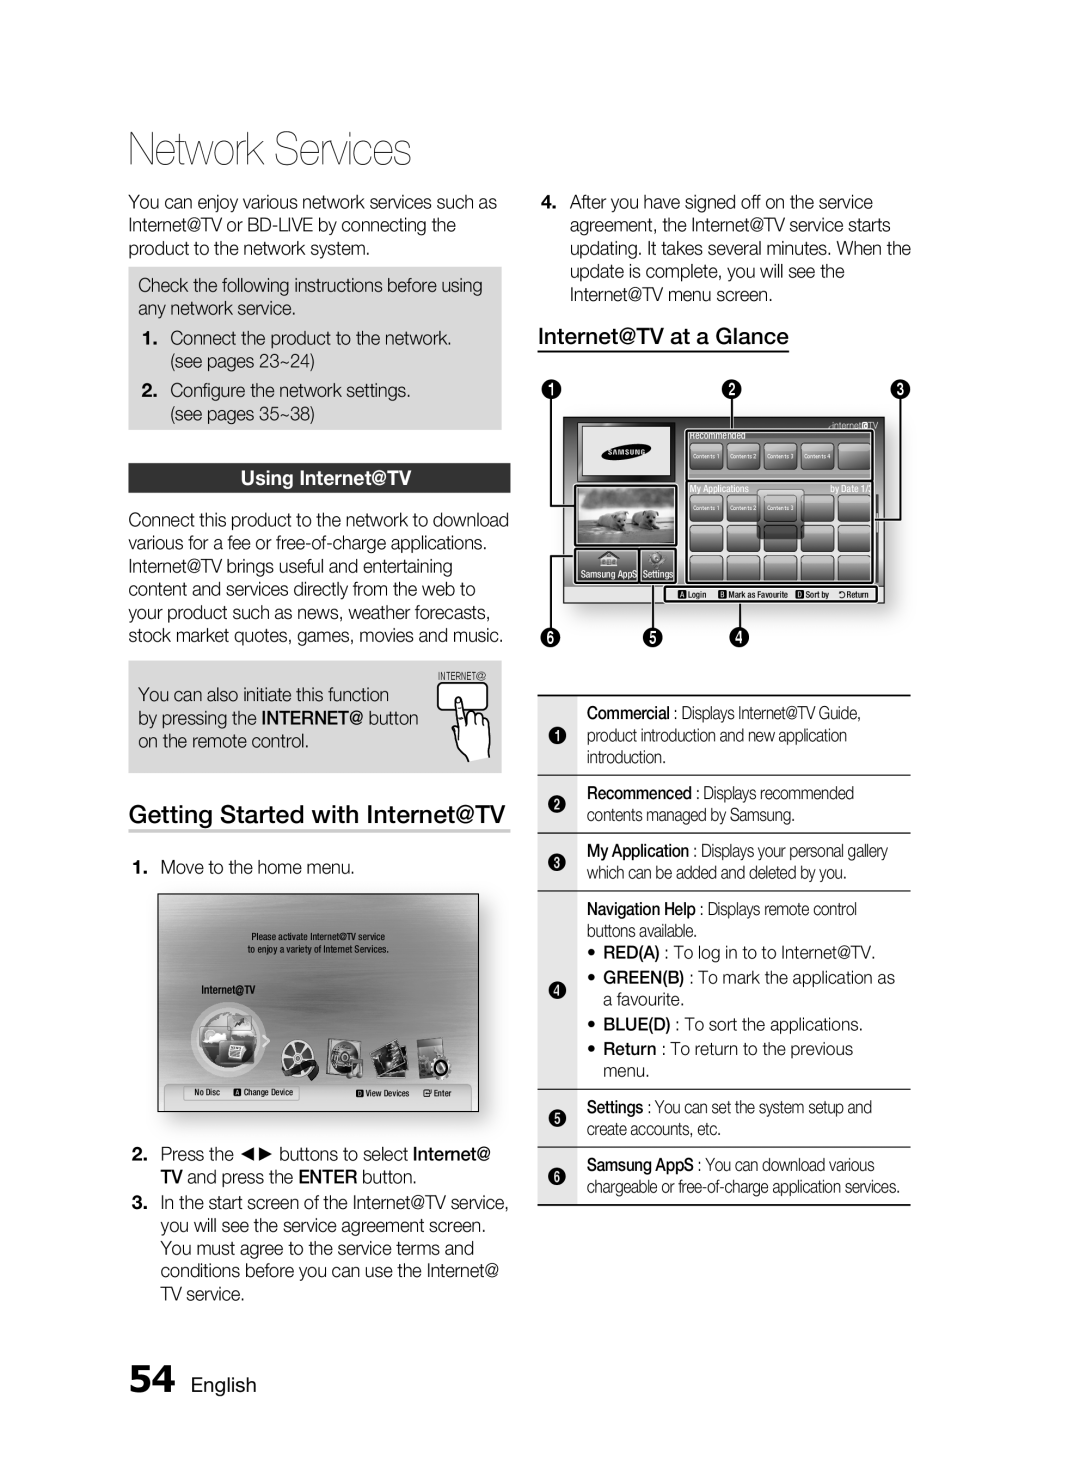 Samsung HT-C7300/EDC manual Network Services, Getting Started with Internet@TV, Internet@TV at a Glance, Using Internet@TV 